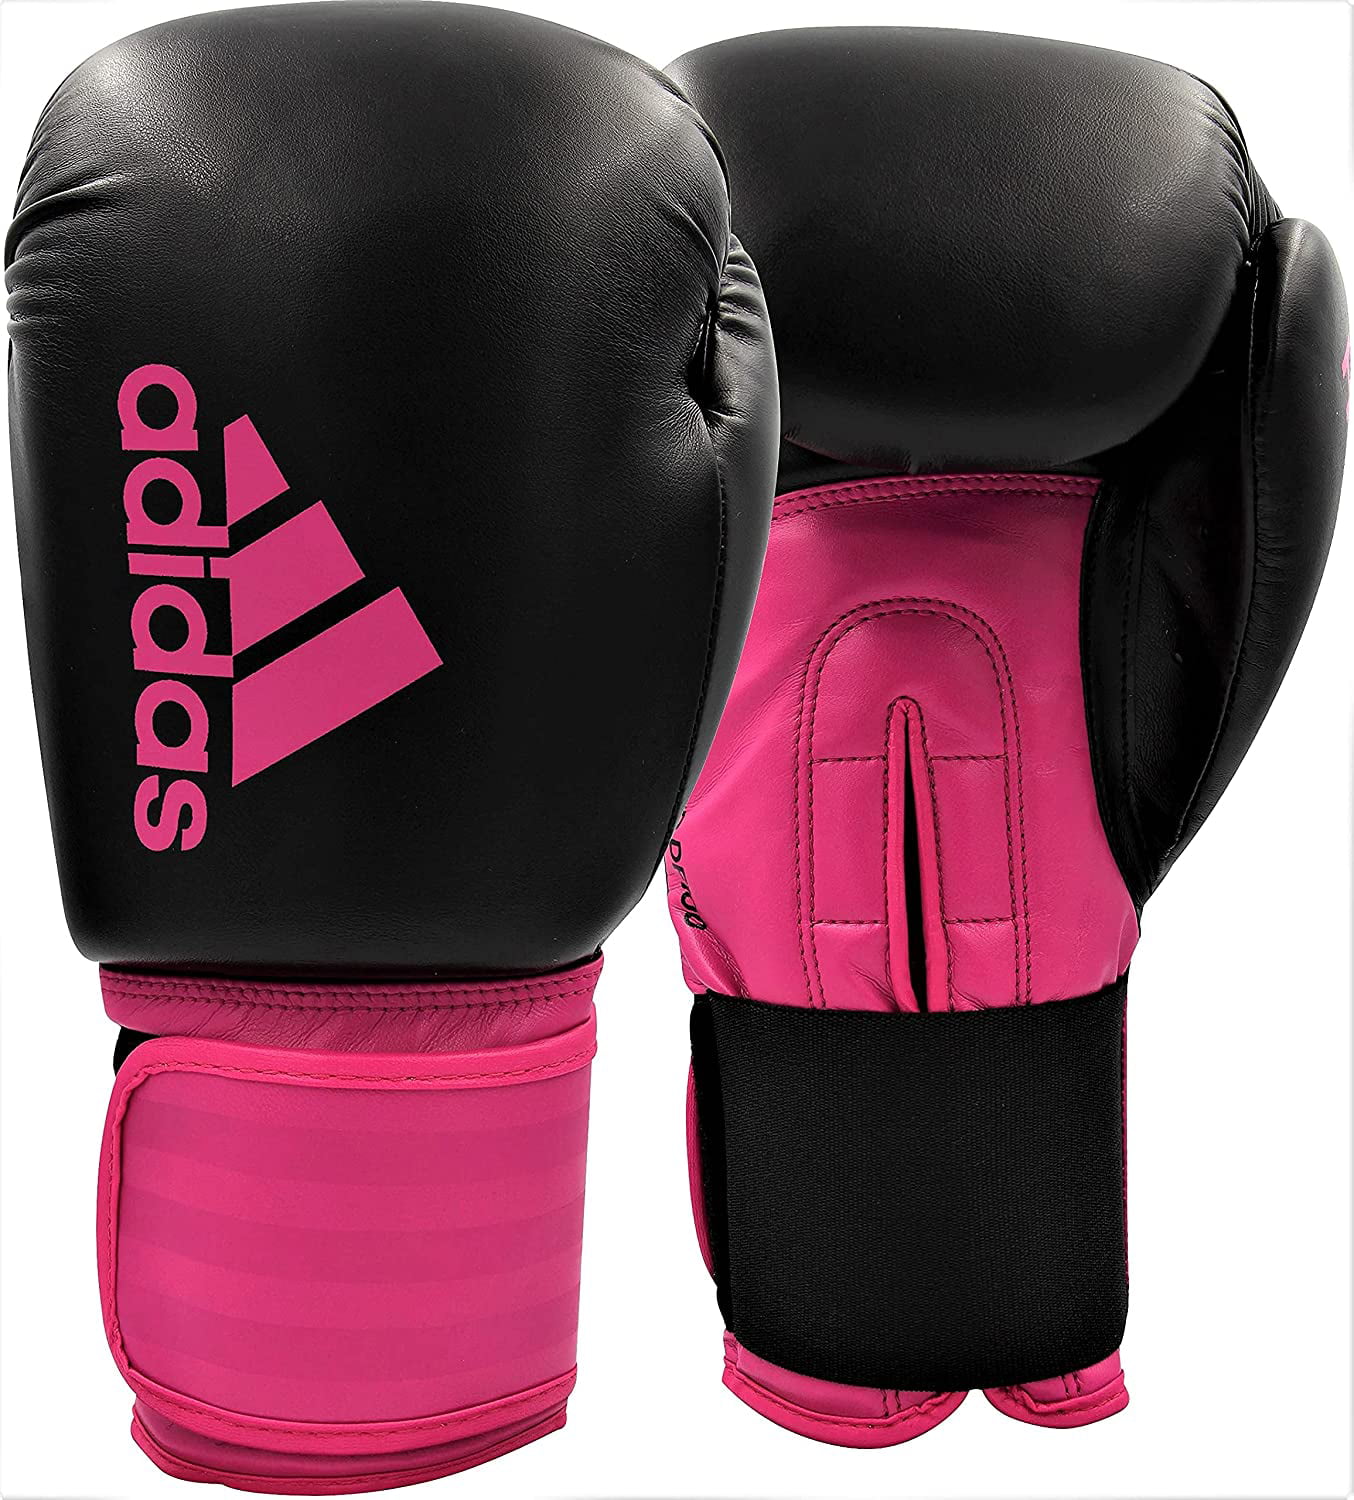 Details about   Boxing gloves Hybrid 300 2.0 black and white 